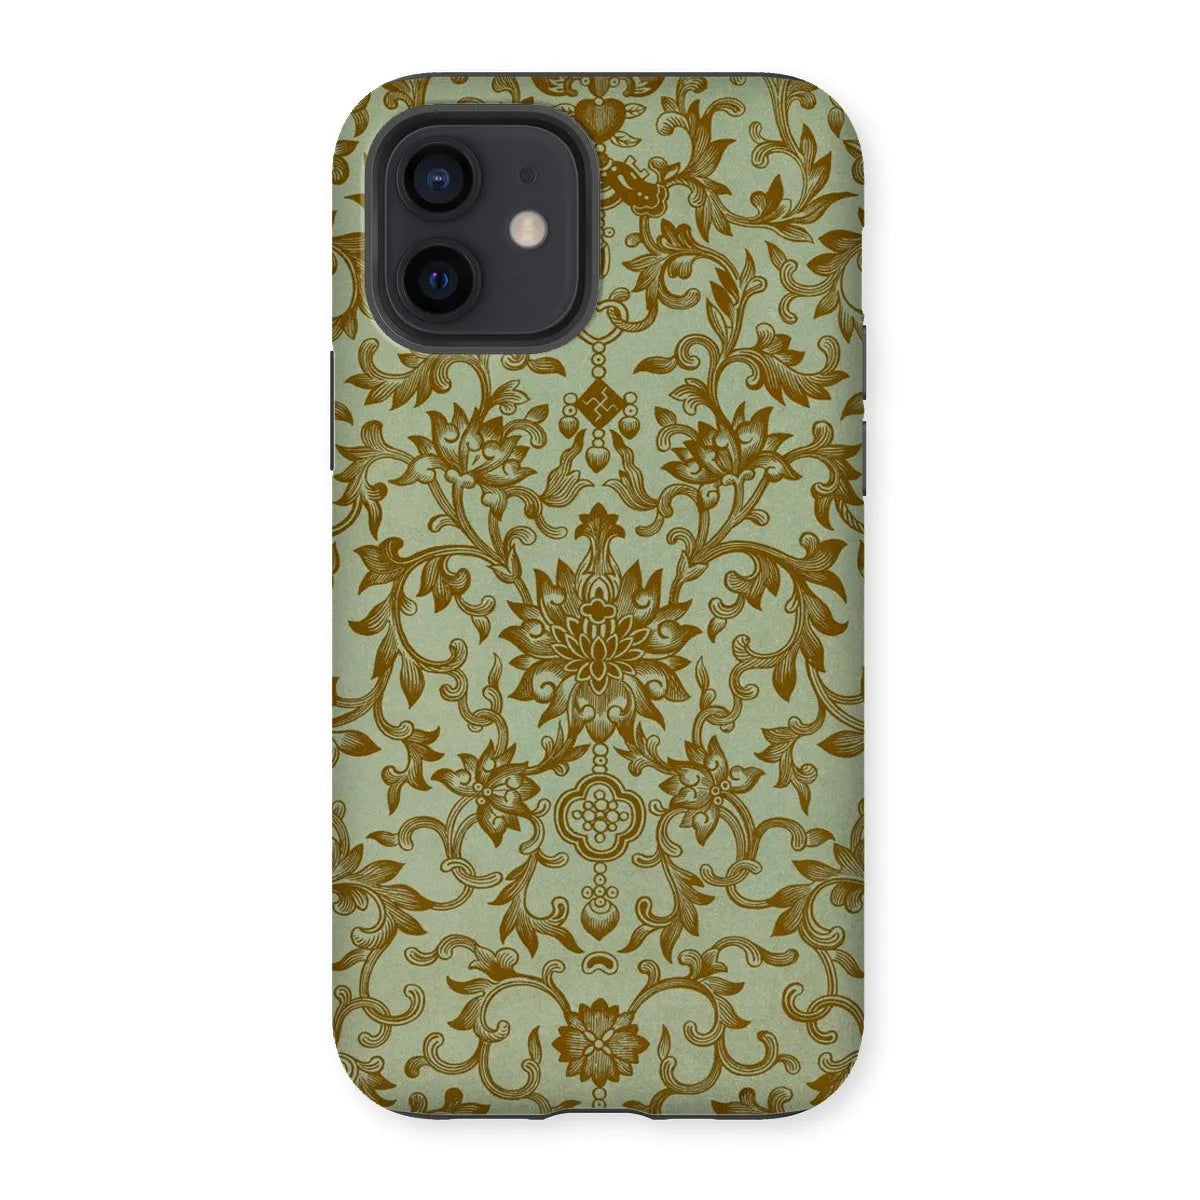 Earthy Chinese Floral Art Pattern Phone Case - Owen Jones - Iphone 12 / Matte - Mobile Phone Cases - Aesthetic Art